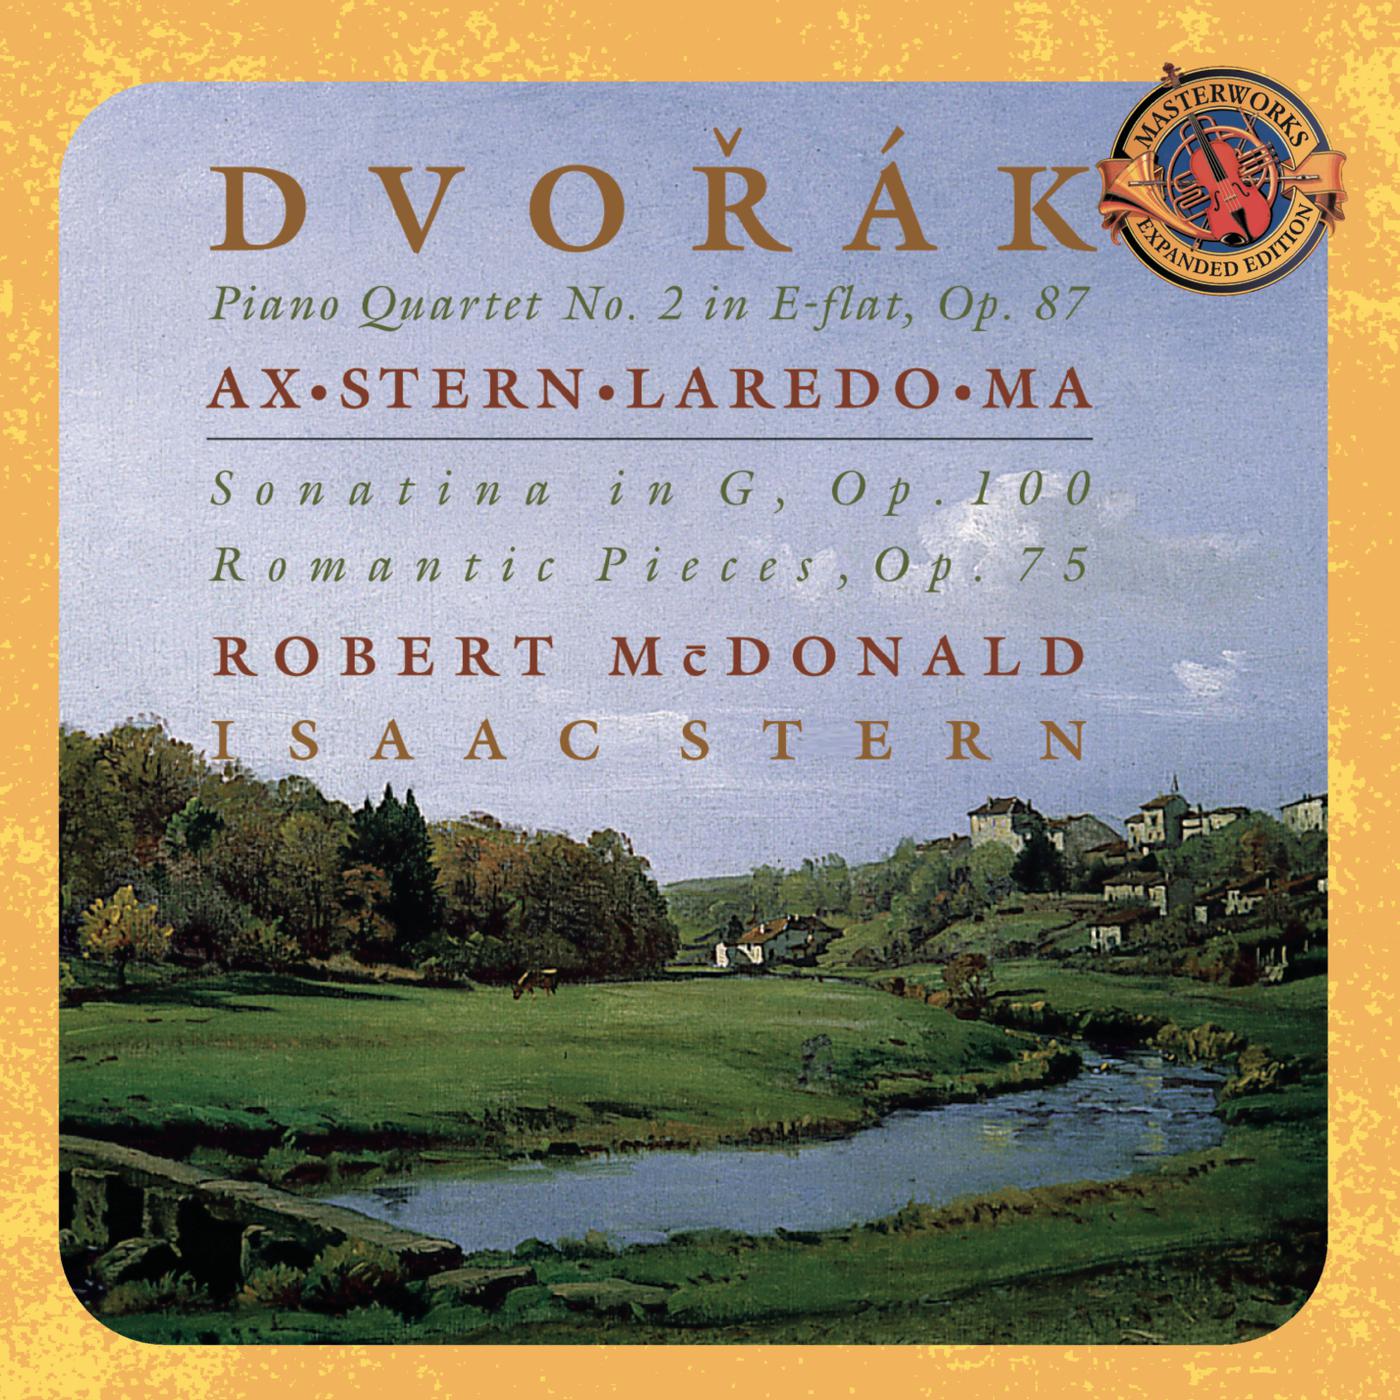 Dvorák: Piano Quartet No. 2 in E-flat Major, Op. 87; Sonatina in G, Op. 100; Romatic Pieces, Op. 75 - Expanded Edition